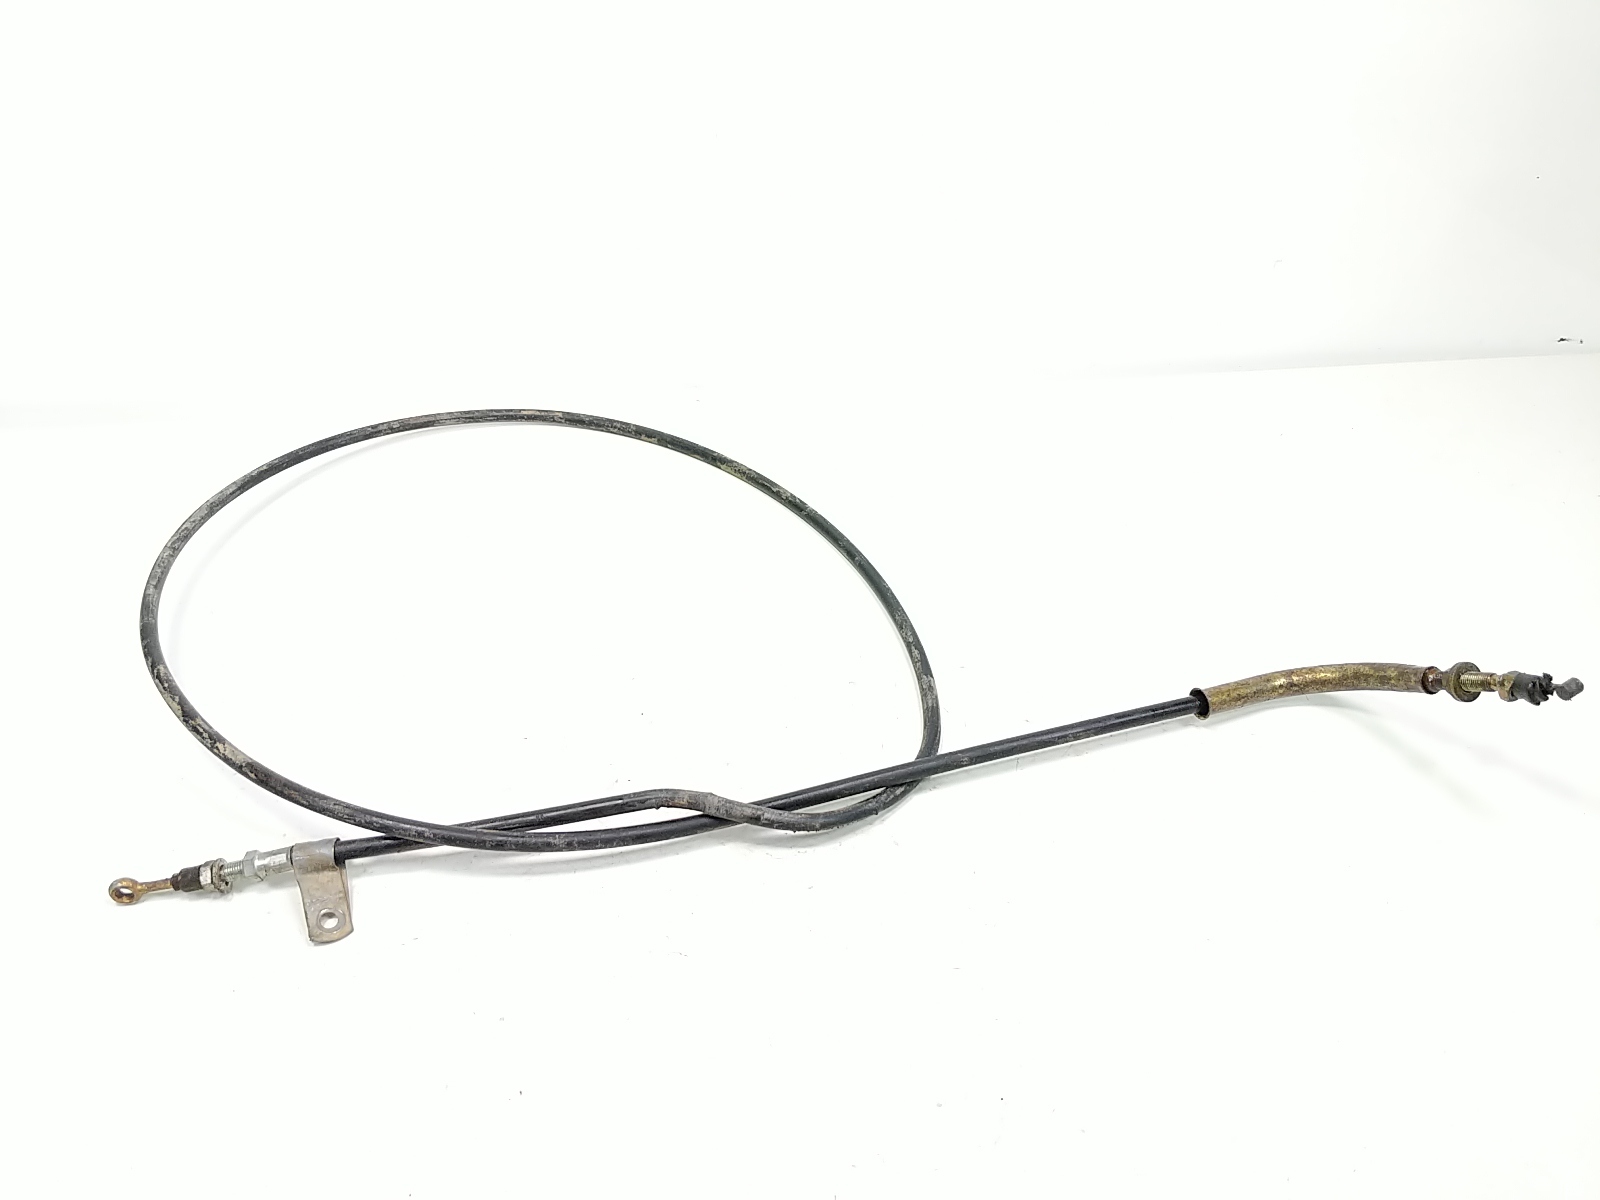 08 Arctic Cat Prowler 700 Throttle Cable